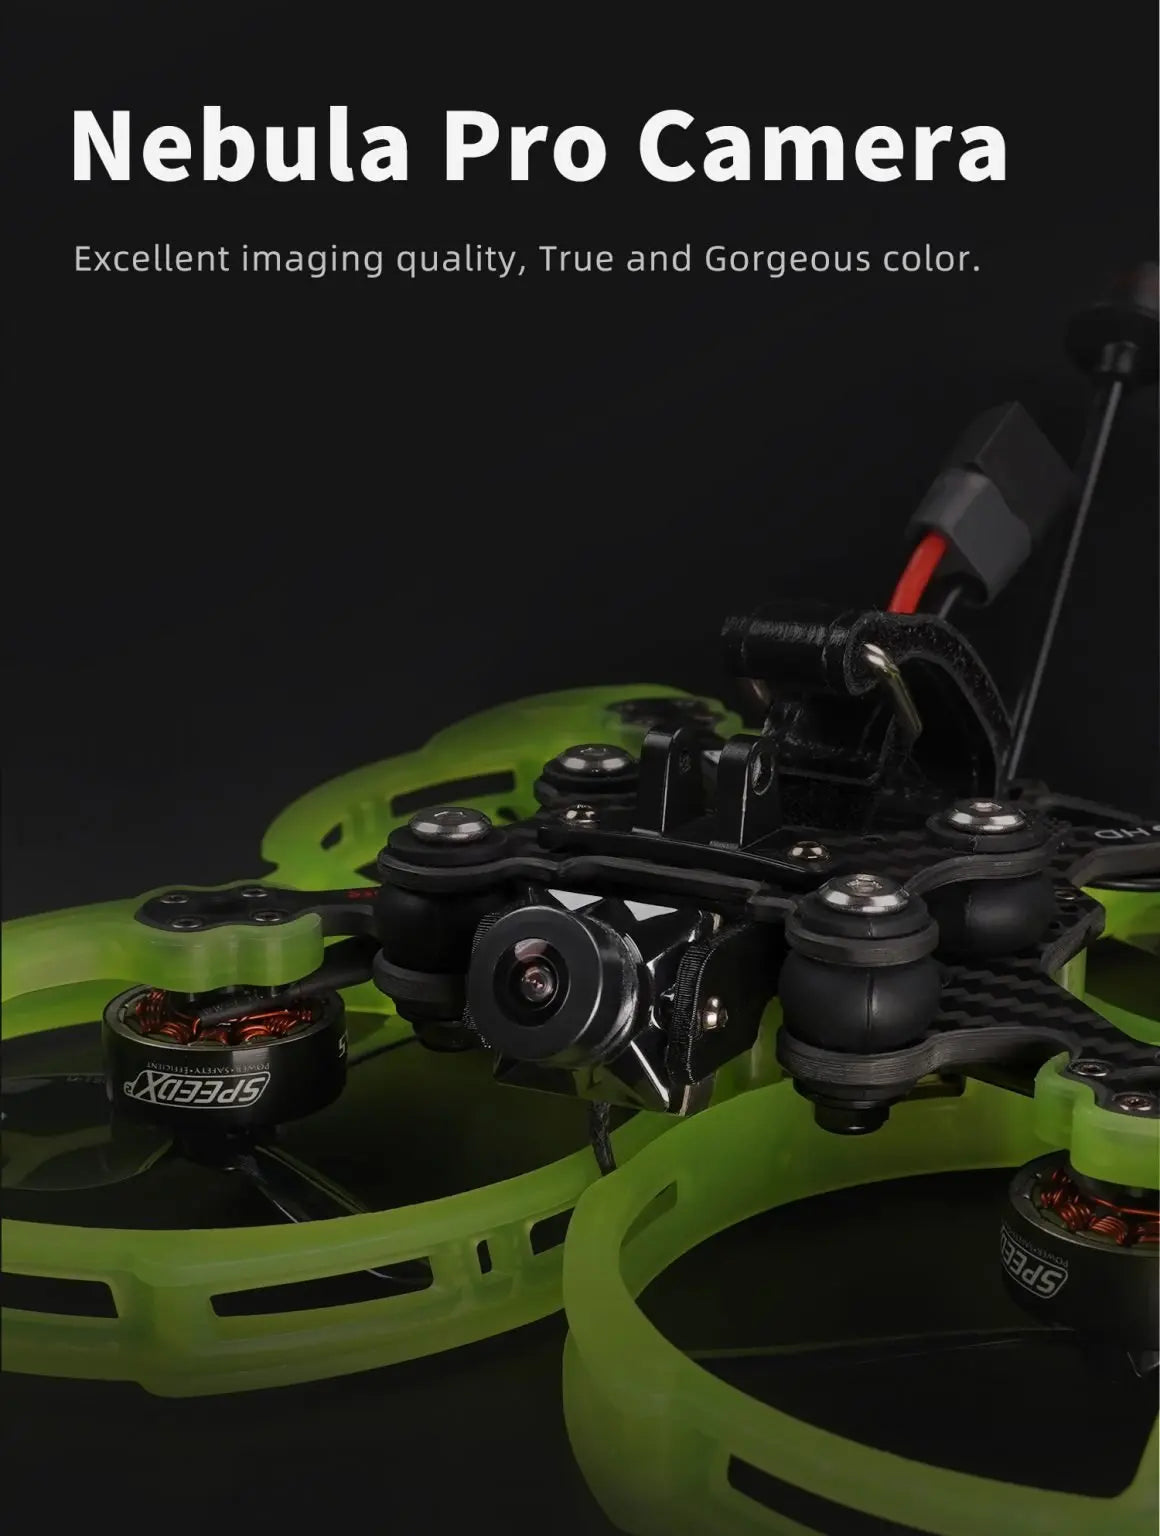 GEPRC CineLog35 FPV Drone, Nebula Pro Camera Excellent imaging quality, True and Gorgeous color . XTZ as